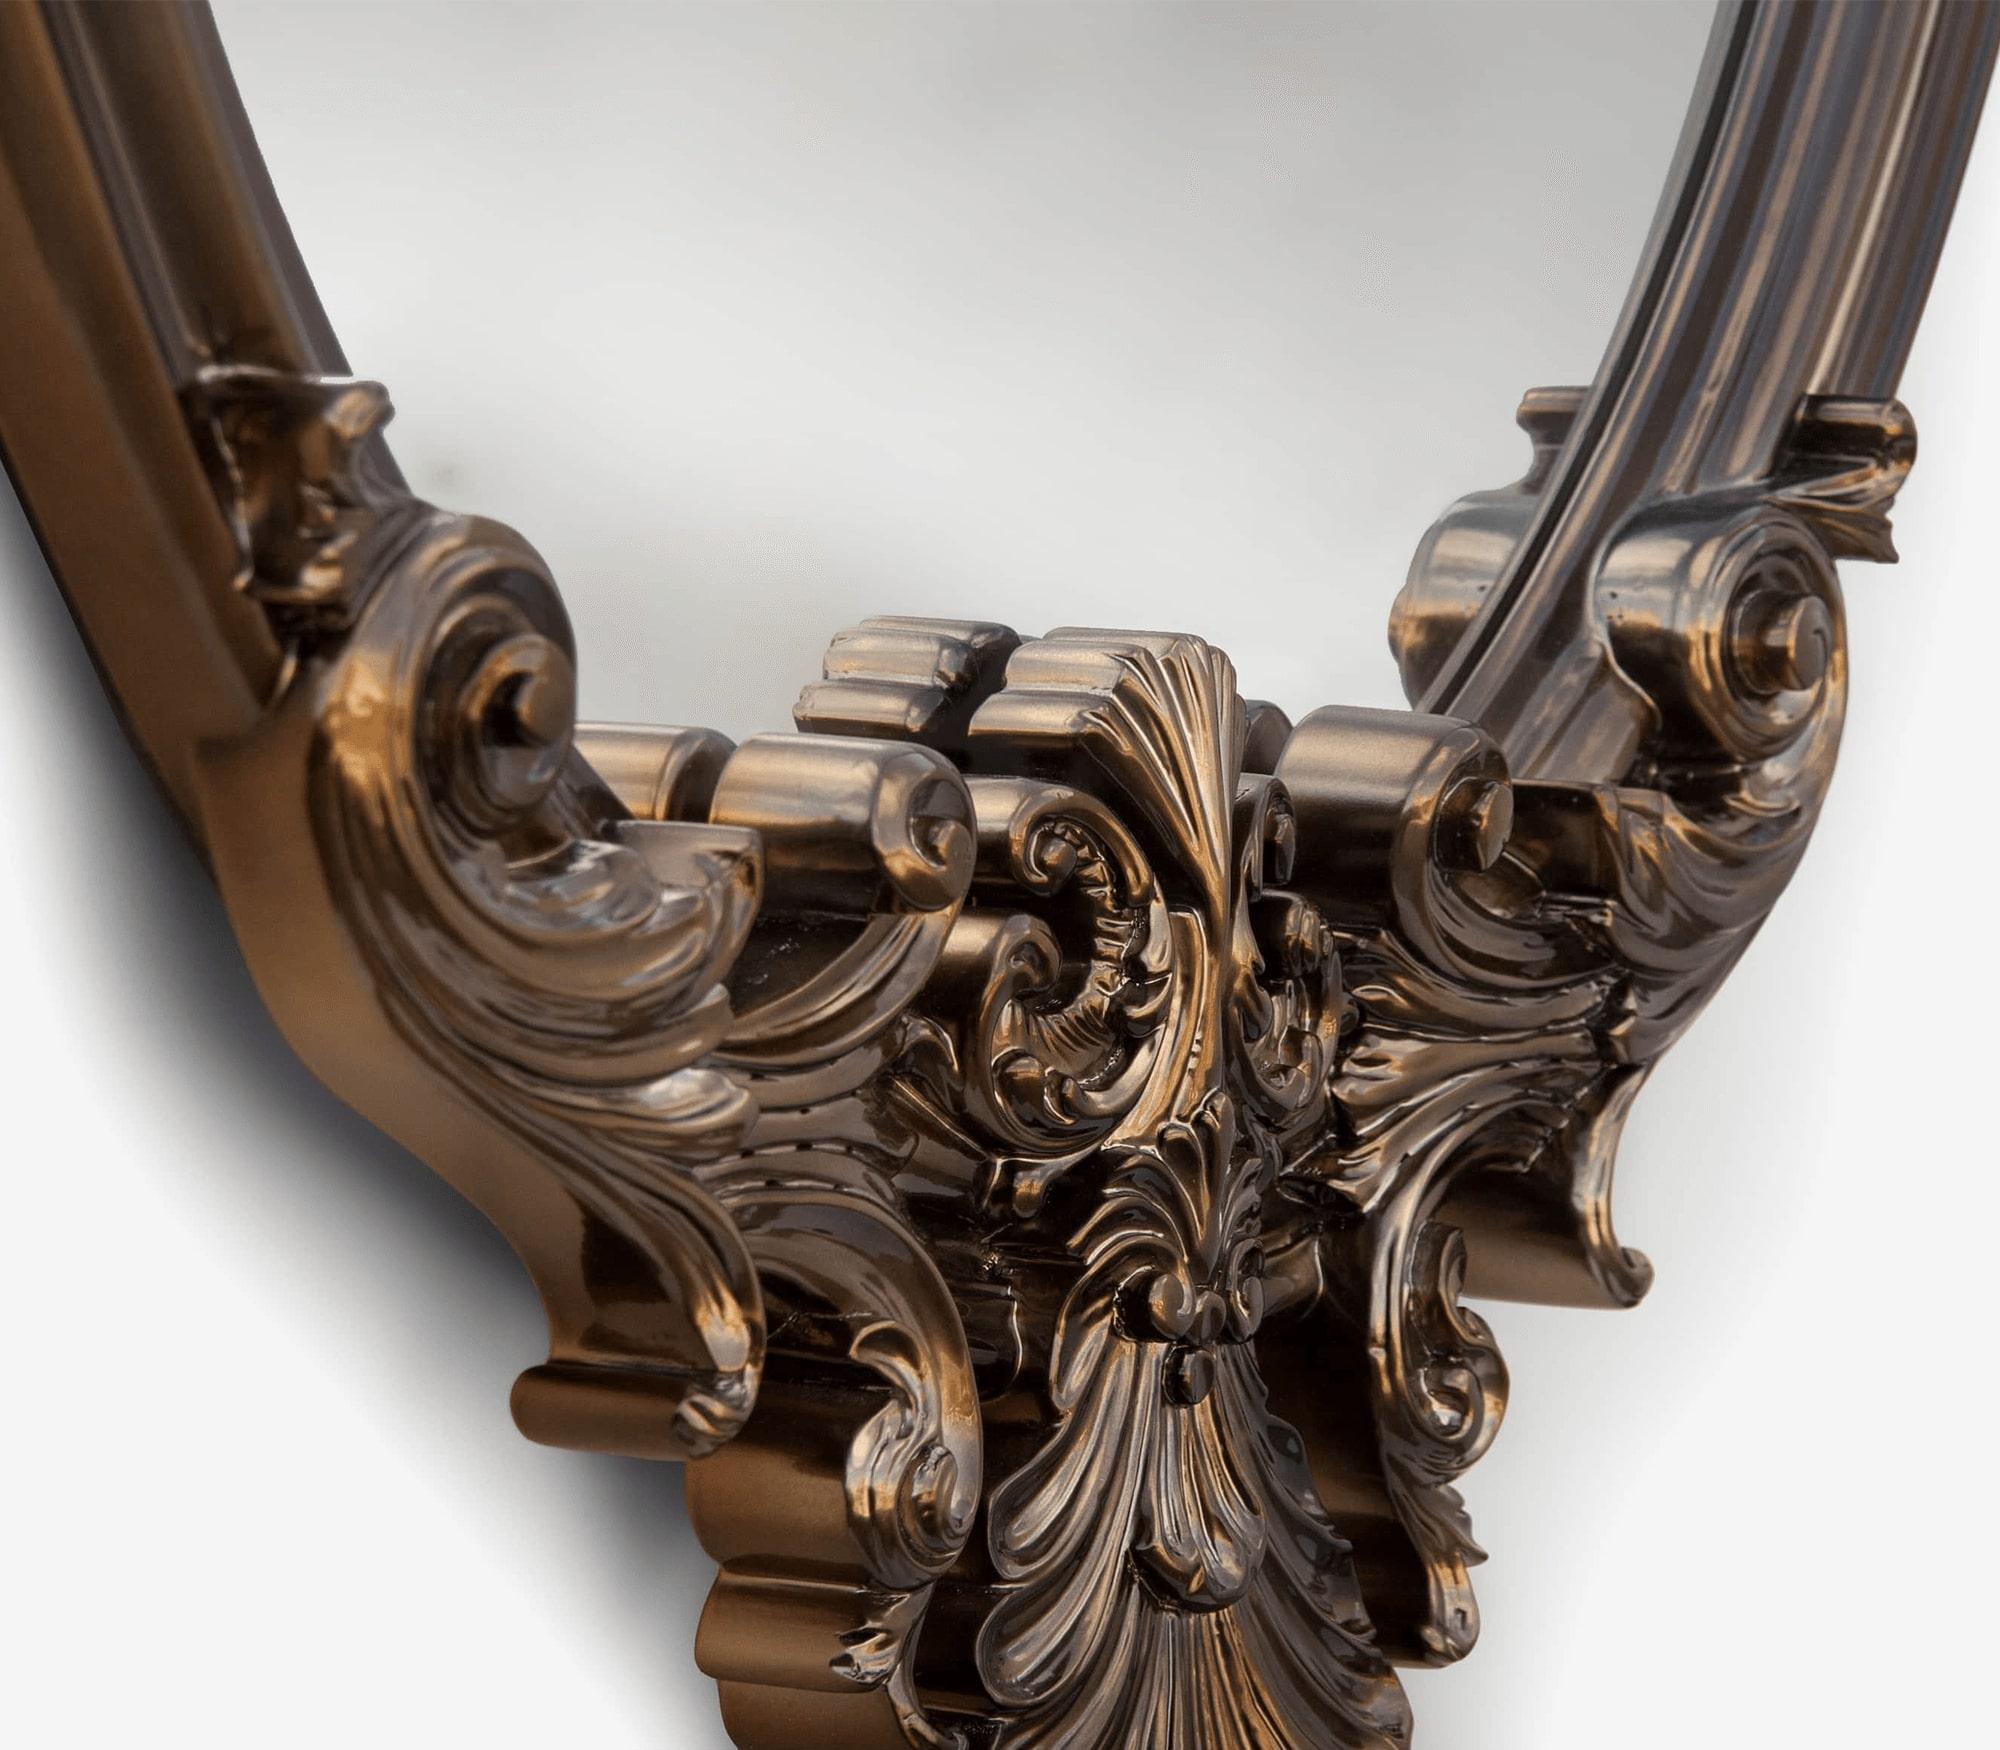 A mirror will always be an object that evokes supreme beauty with an inexplicable mystical appreciation. The Marie Antoinette mirror represents an attitude and the characteristics of a critical “époque” that shaped French history. Inspired by the